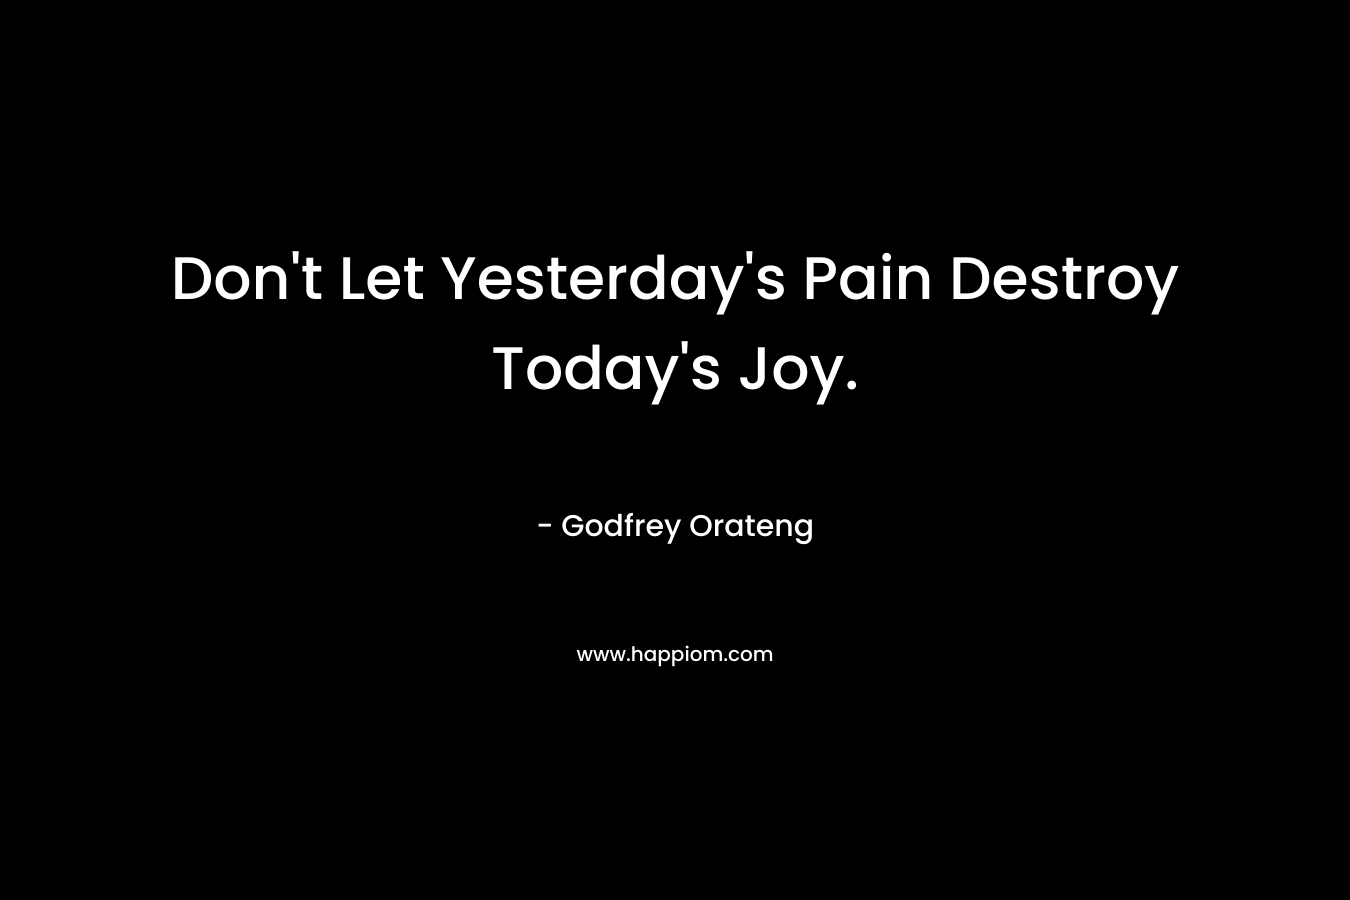 Don't Let Yesterday's Pain Destroy Today's Joy.